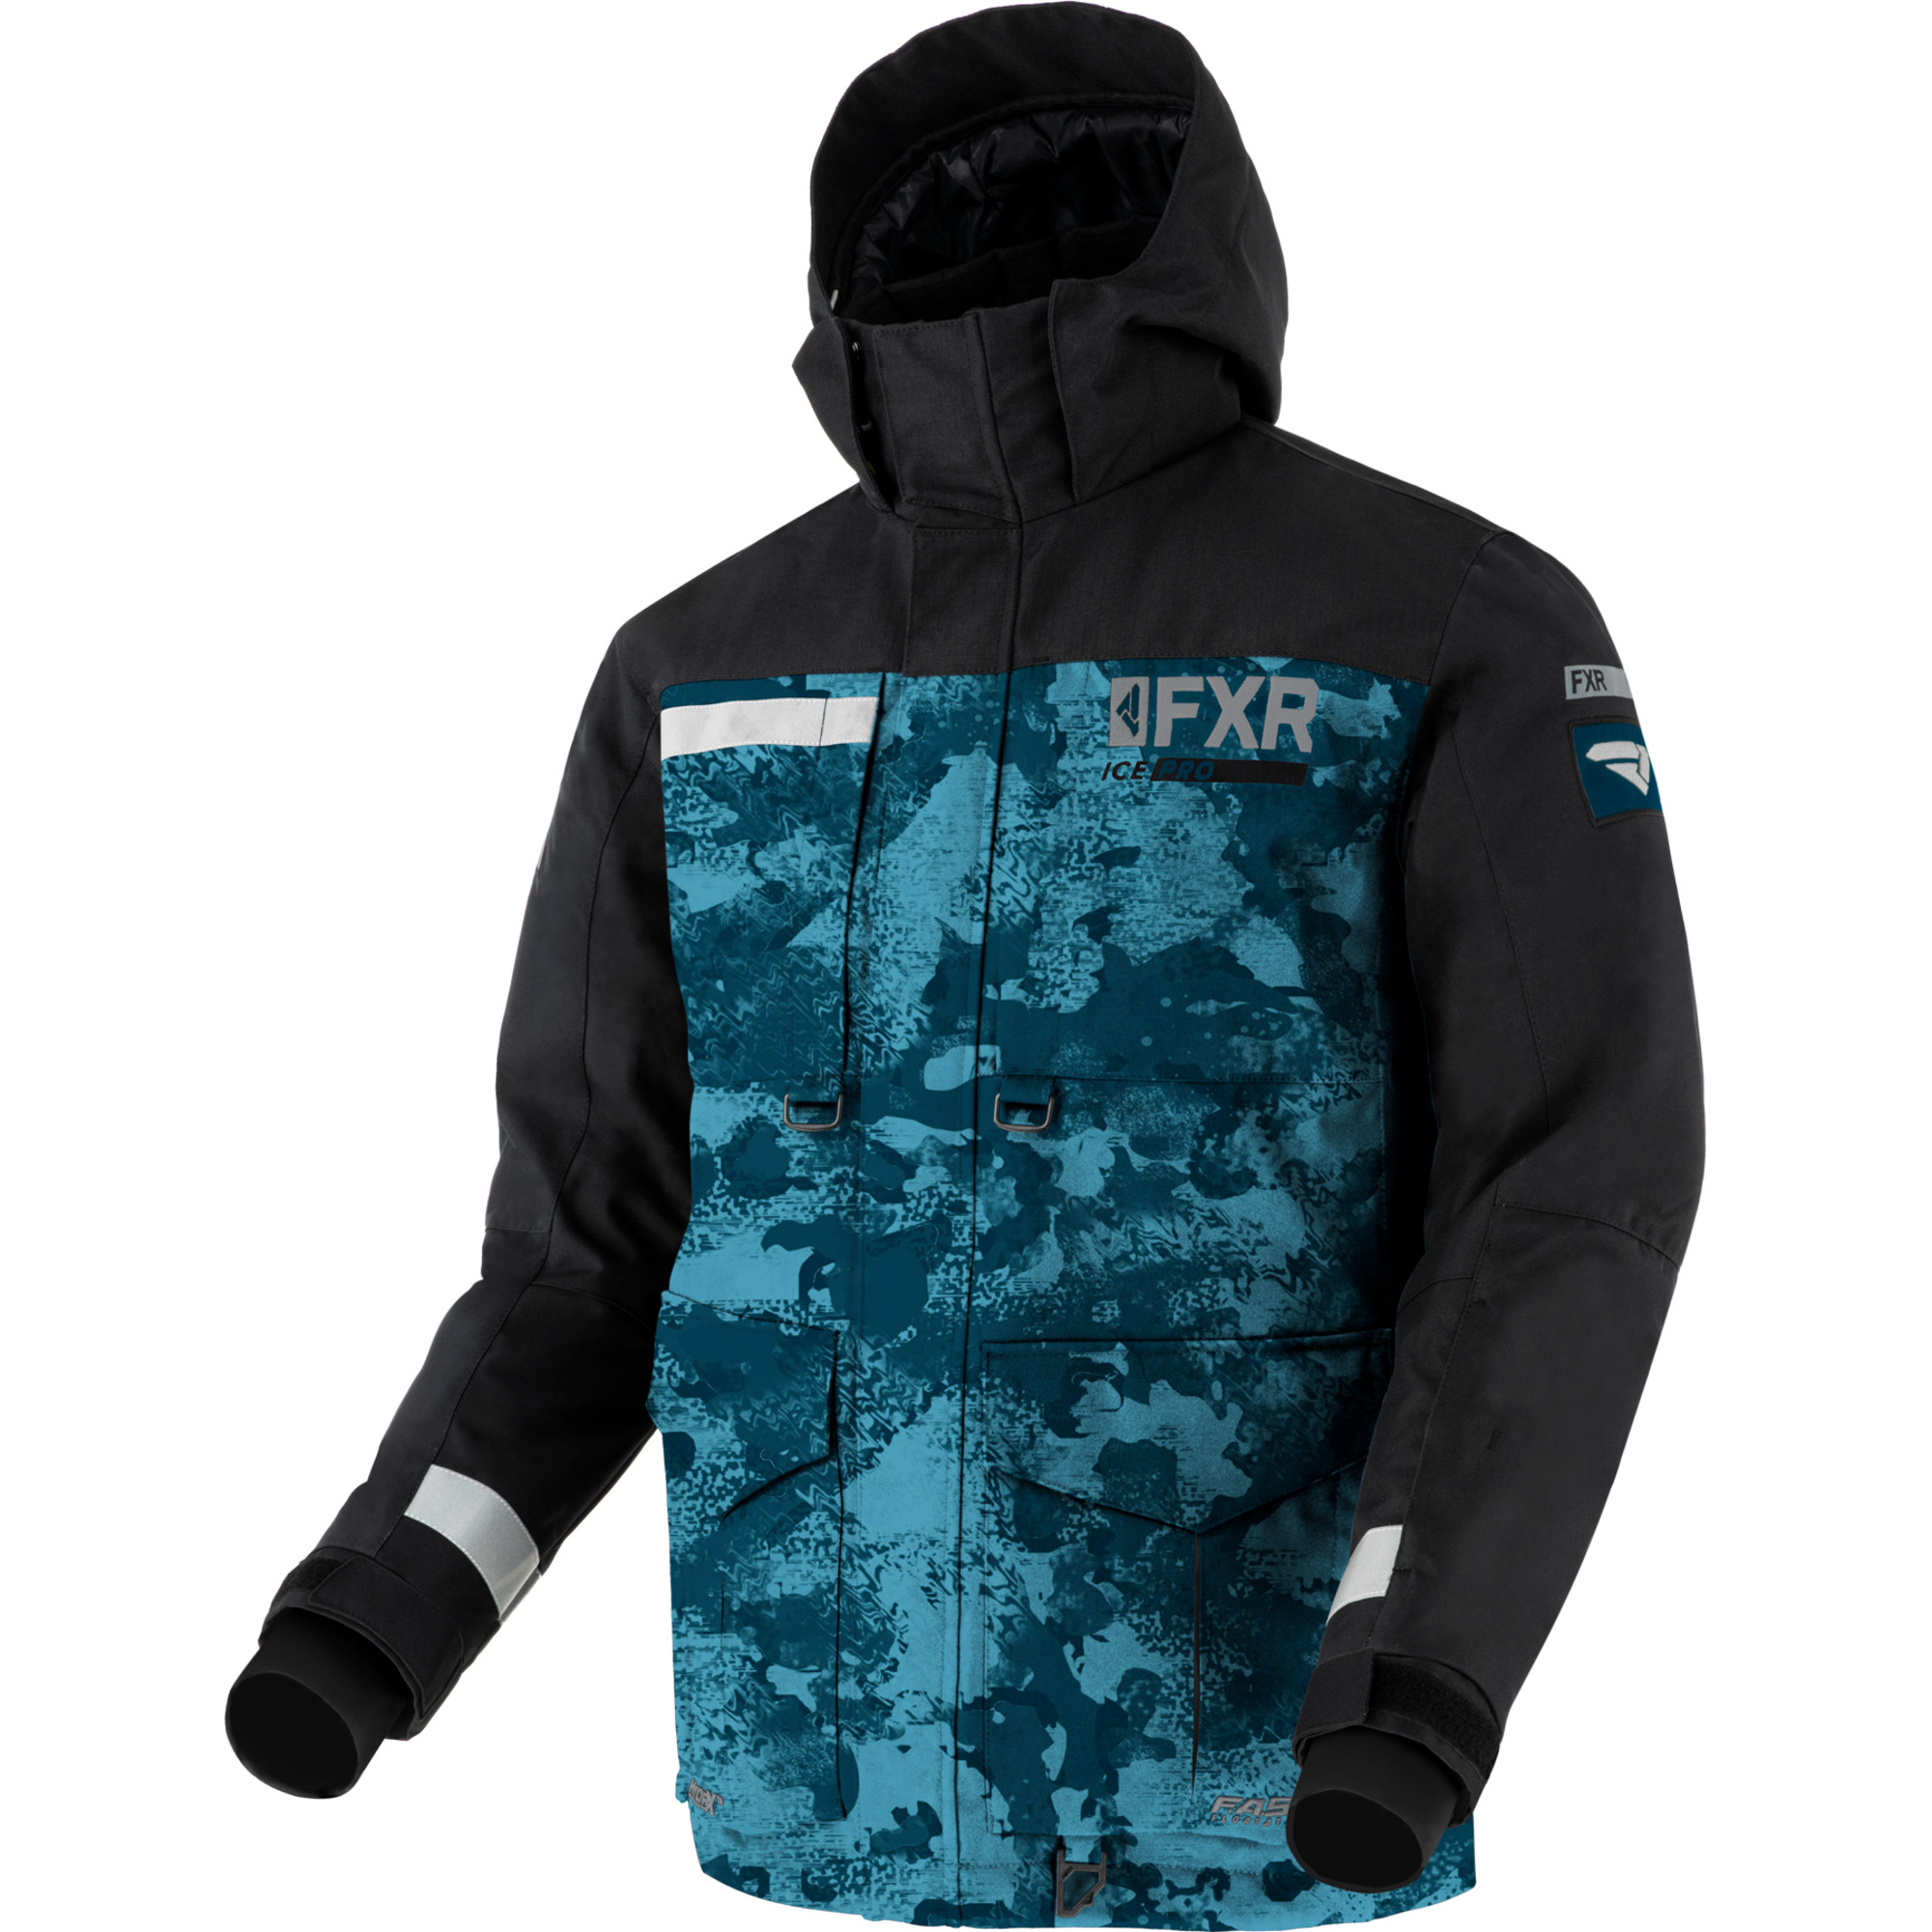 fxr racing insulated jackets for men excursion ice pro fast